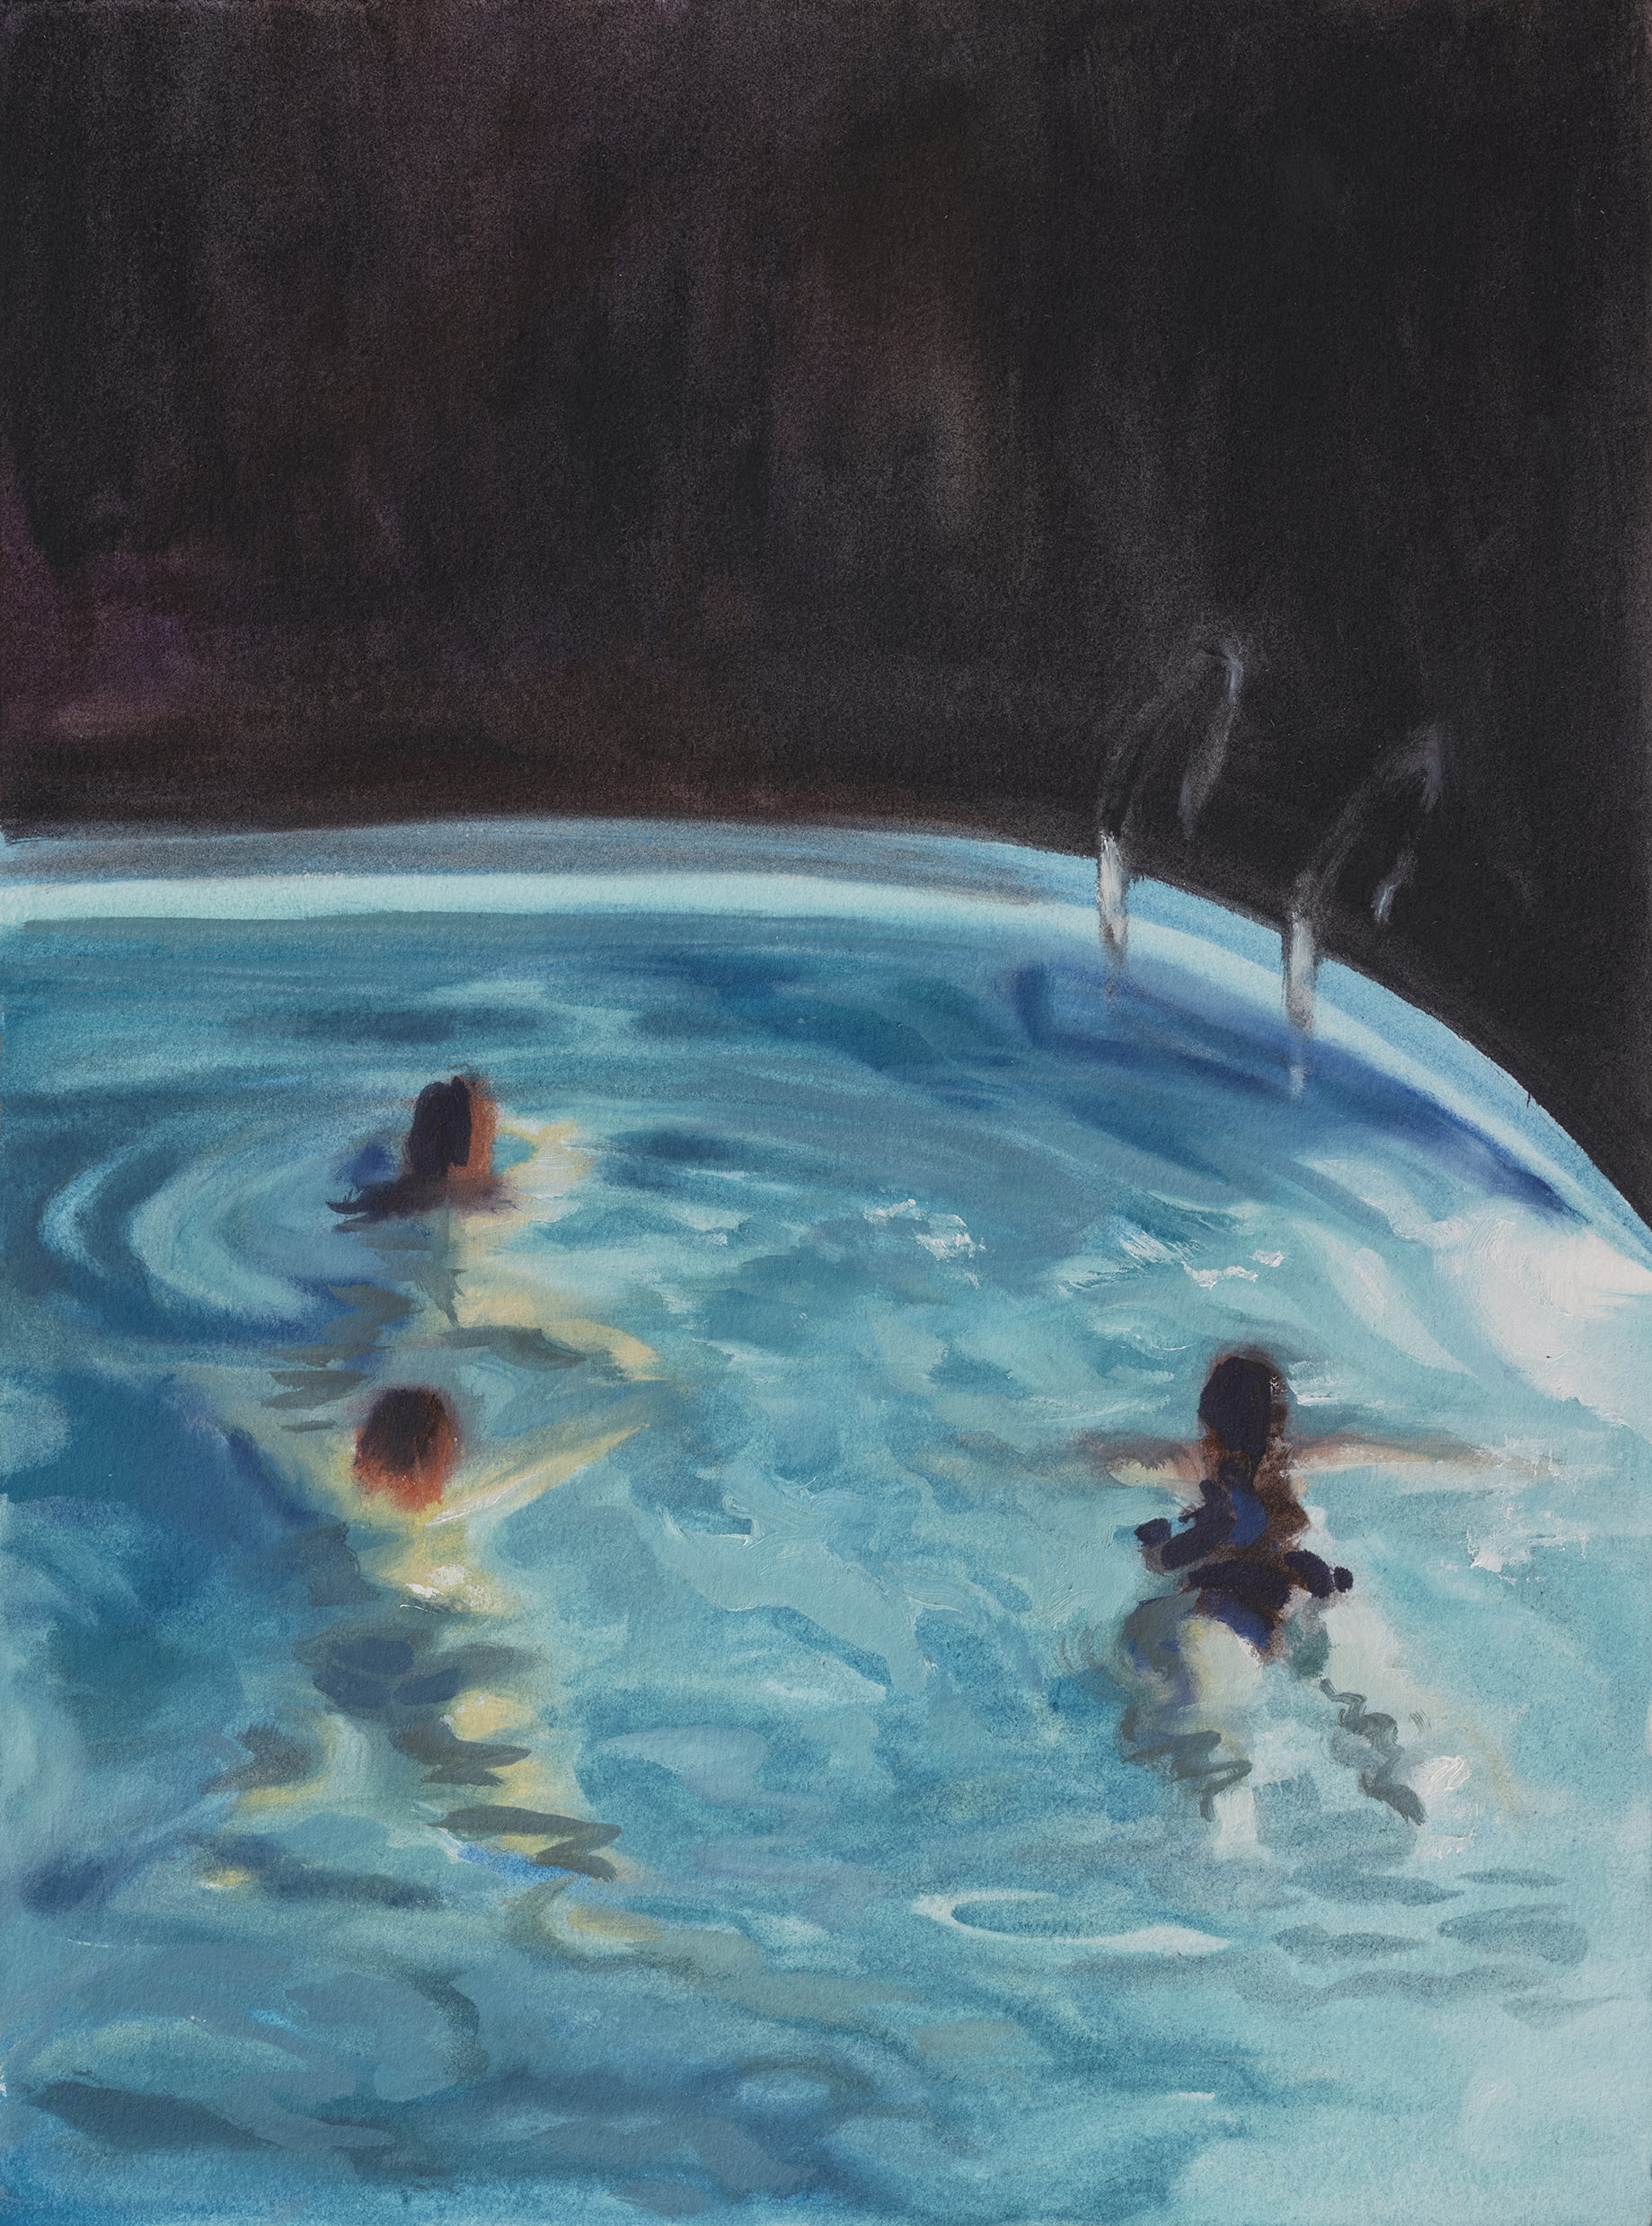 Night Pool 2 - Bright blue swimming pool with swimmers on a dark background - by Sarah Hardy